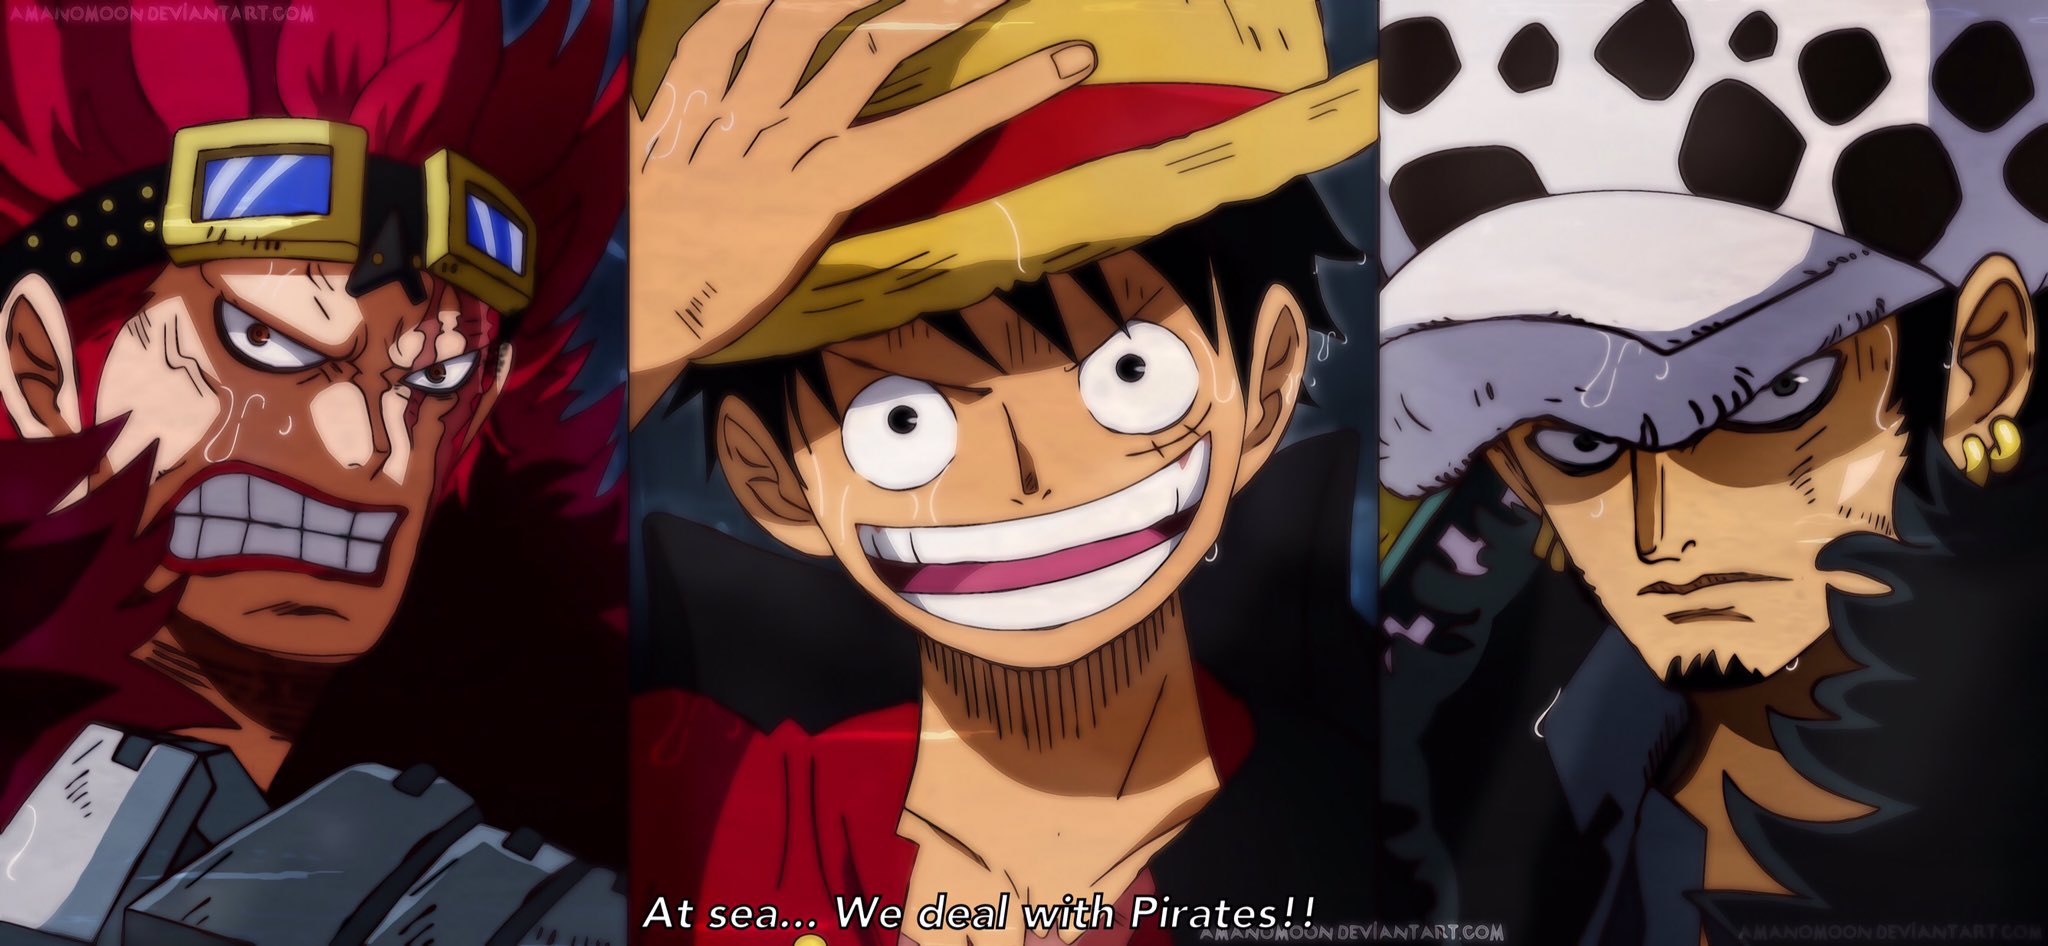 One Piece Chapter 974 Luffy Kid Law Final Trio By Amanomoon On Deviantart